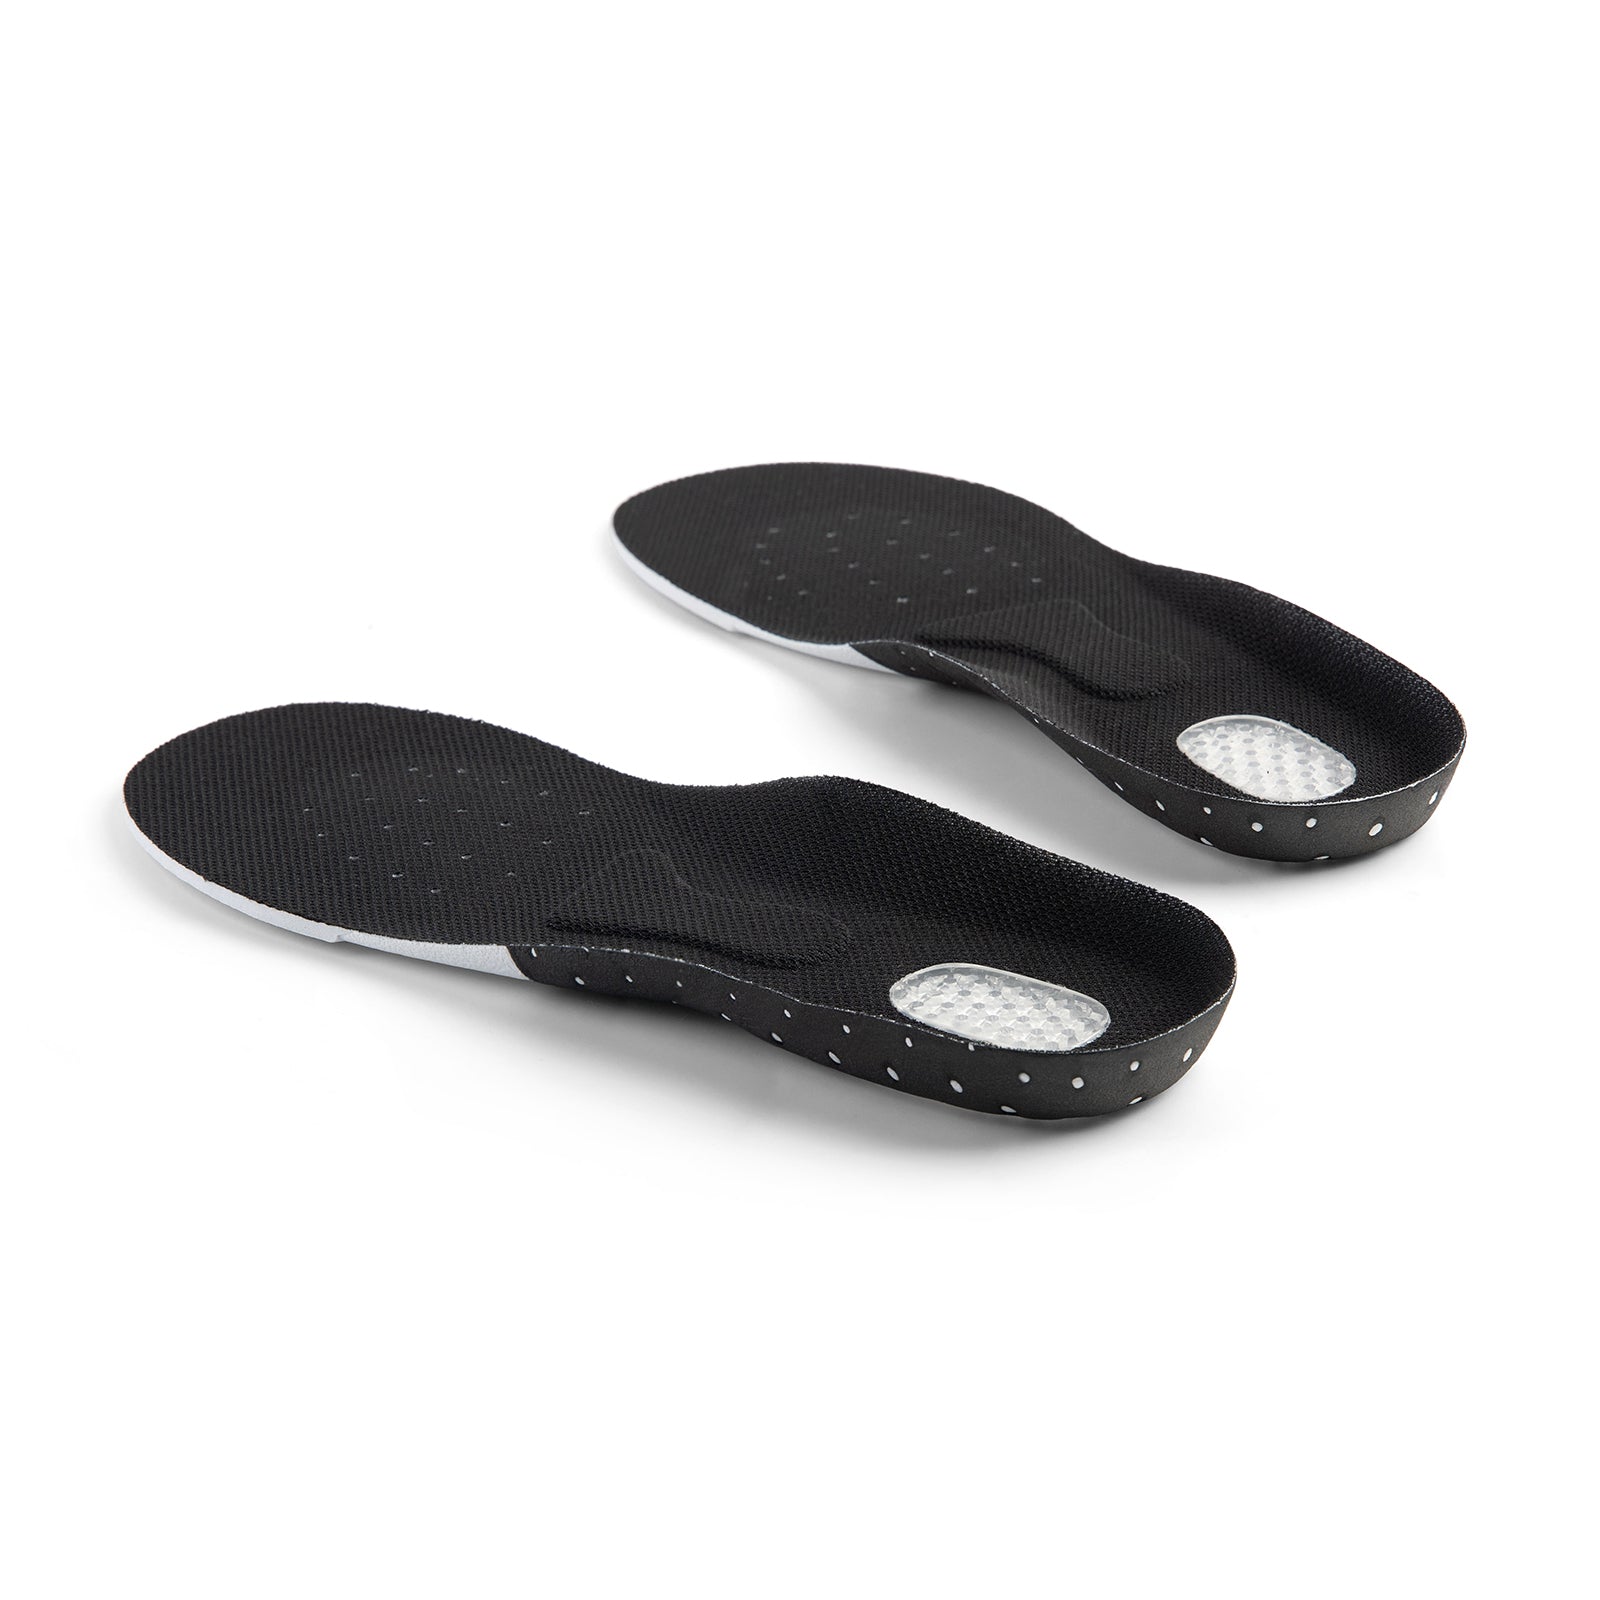 Extra Light Sports Insoles